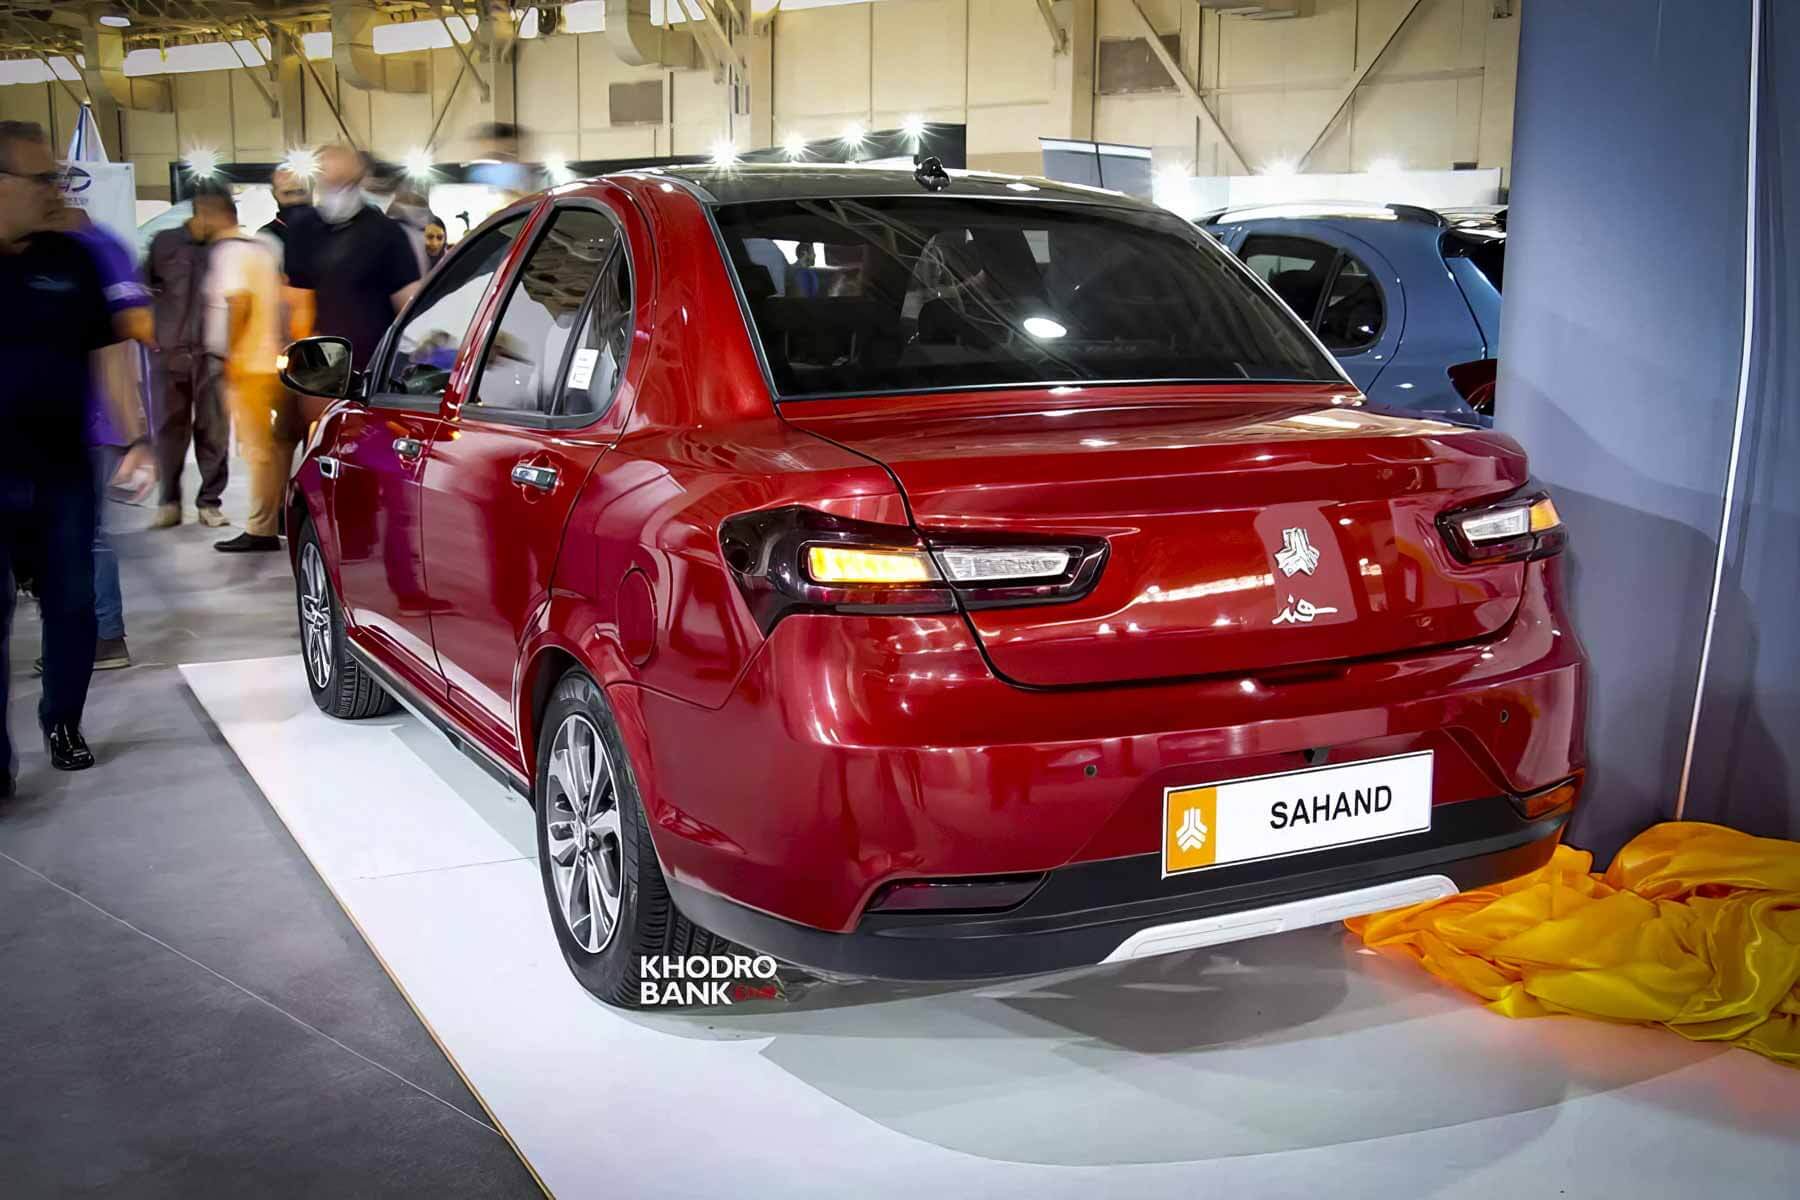 They changed their mind about introducing Iranian SAIPA to the Russian market